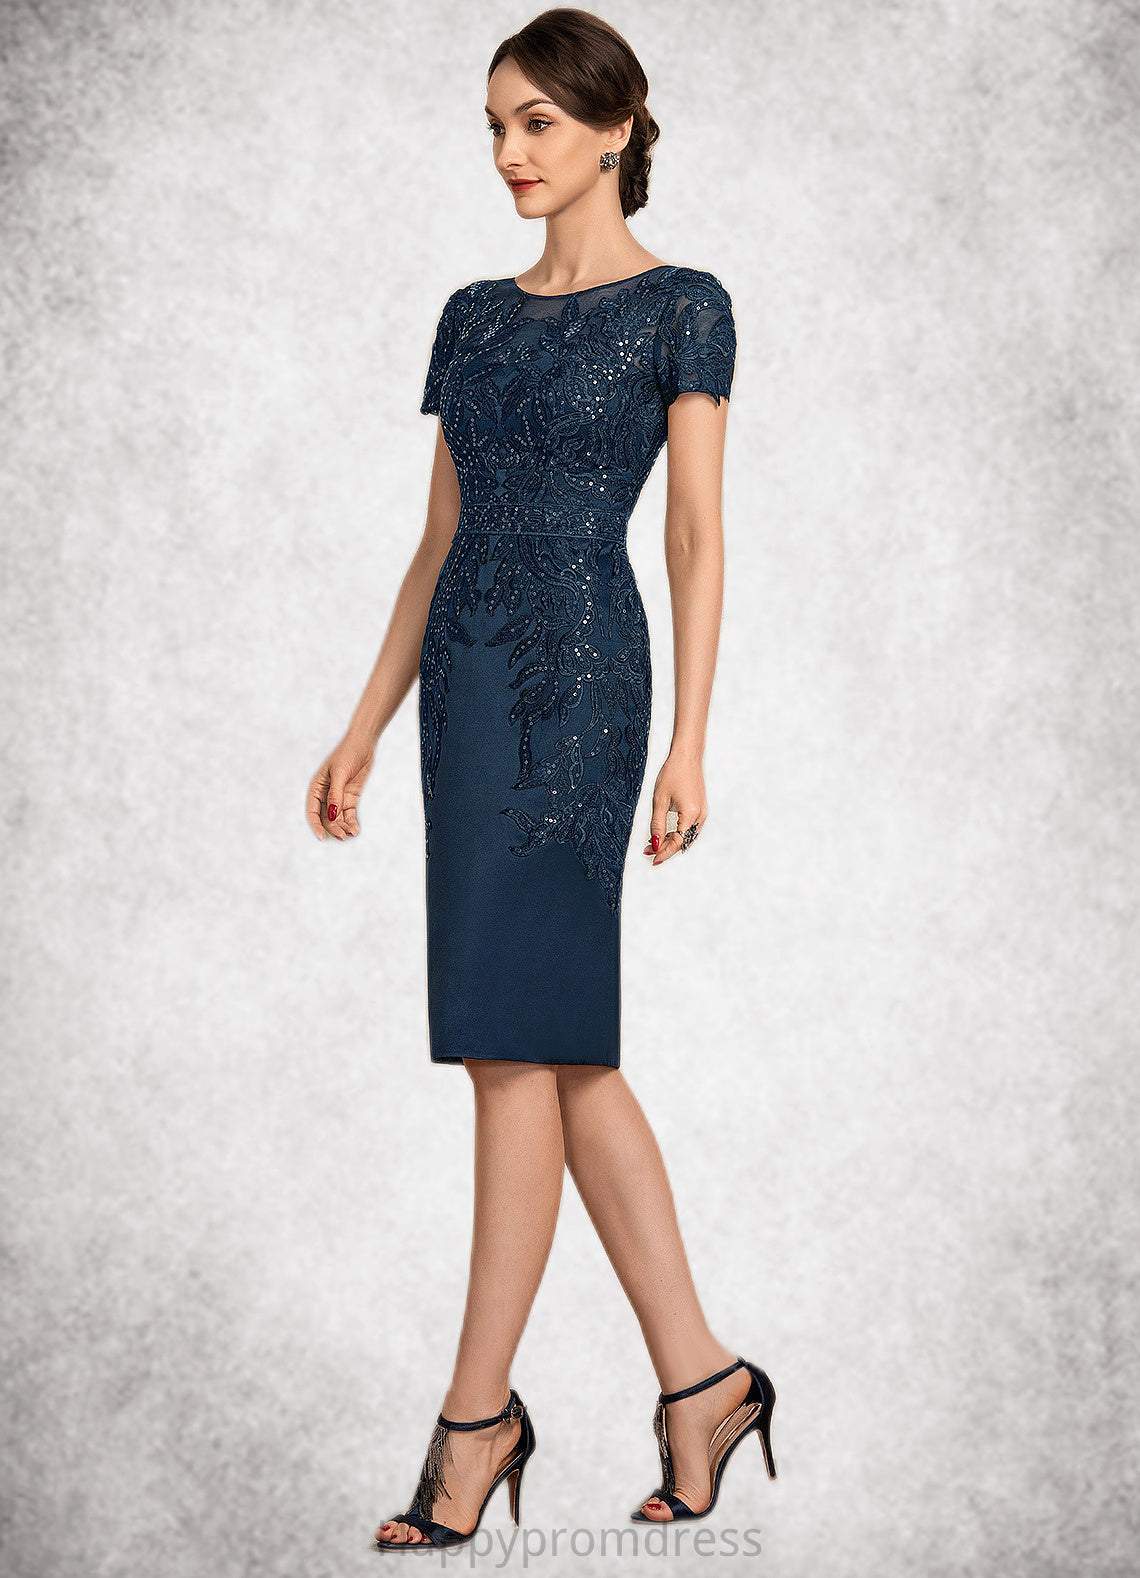 Isabel Sheath/Column Scoop Neck Knee-Length Satin Lace Mother of the Bride Dress With Sequins XXS126P0014586